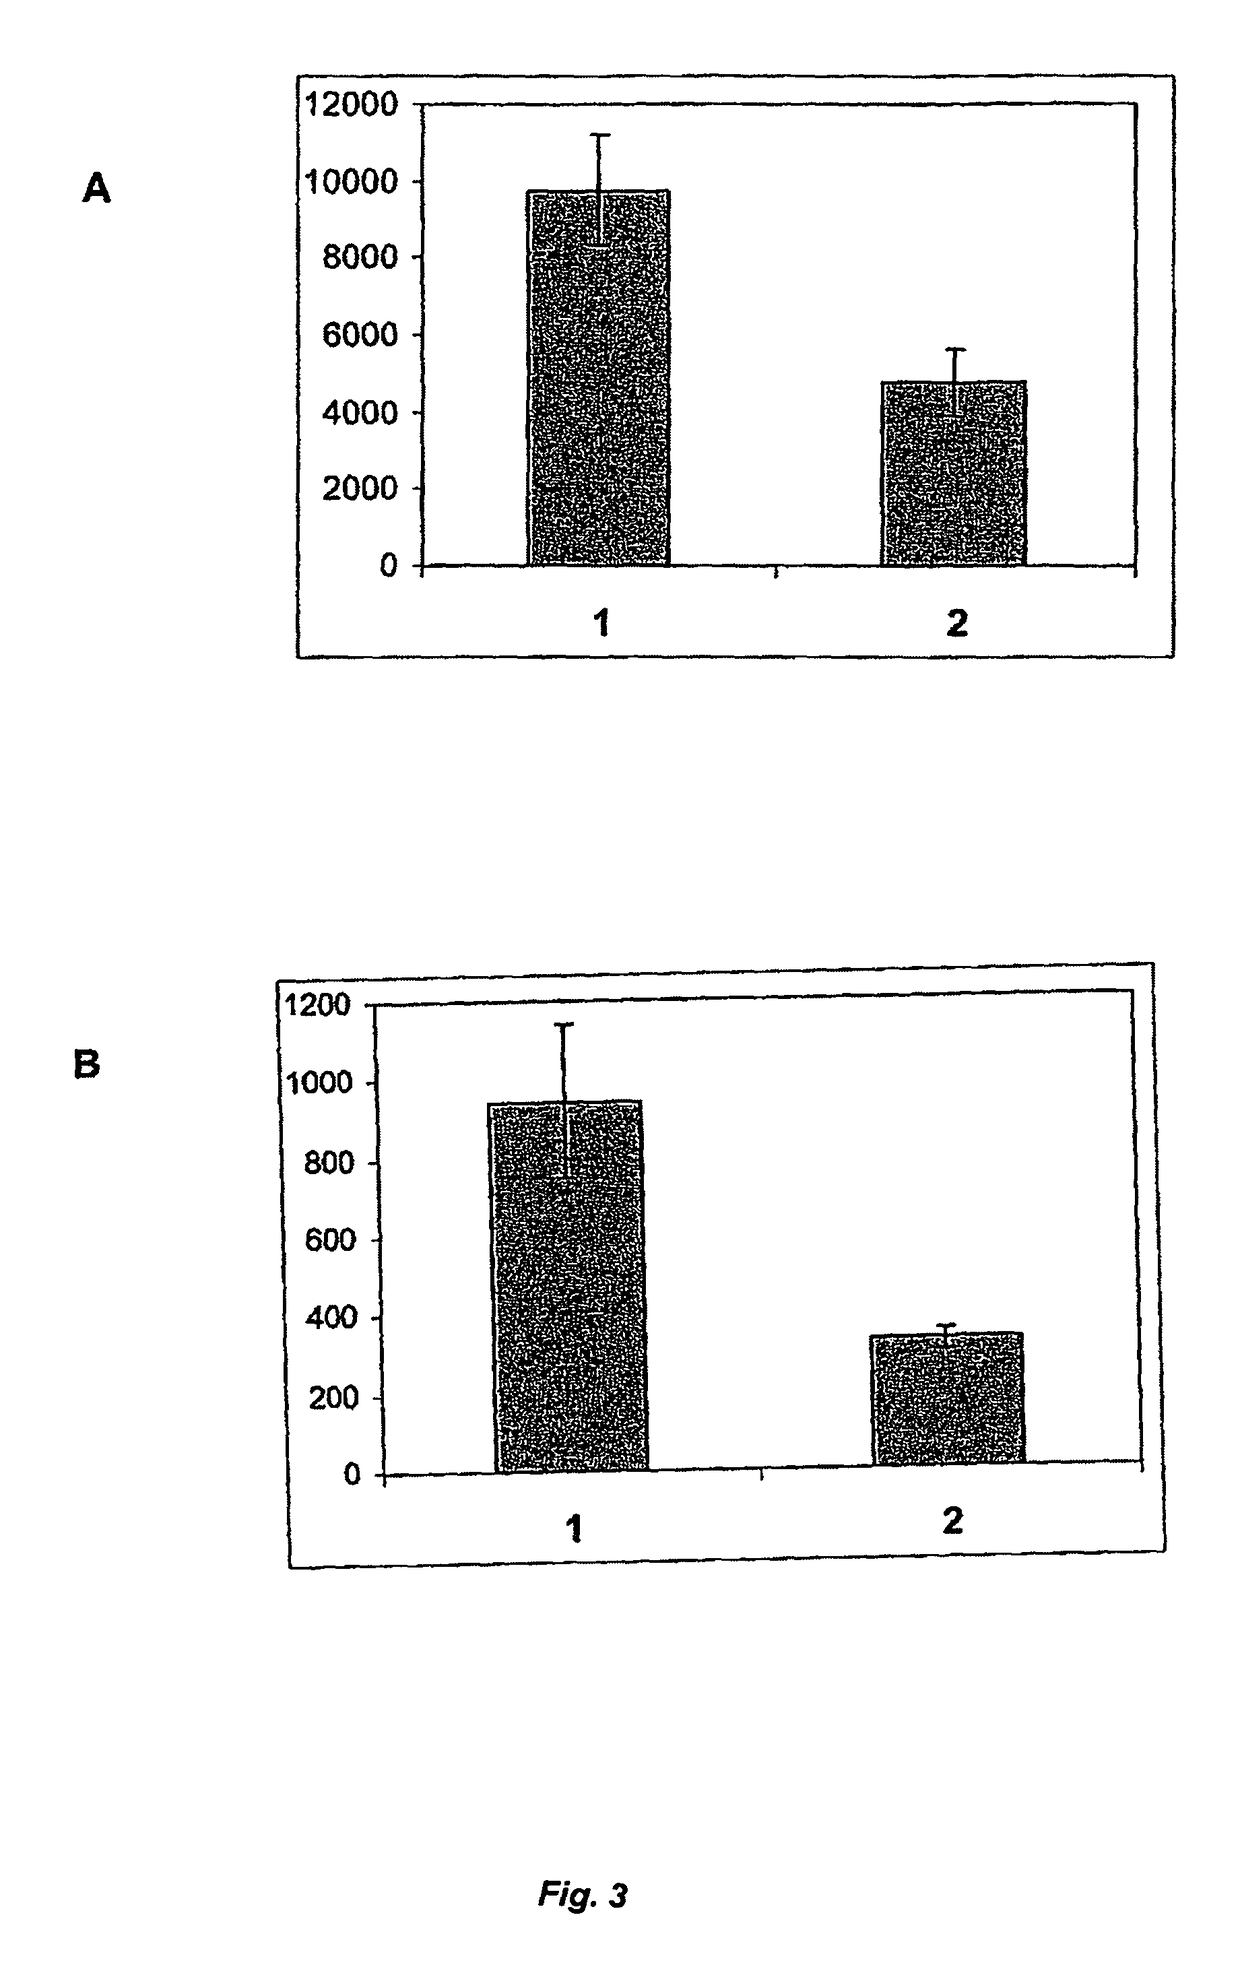 Nucleic acids encoding vitamin K expoxide reductase subunit 1 and vitamin K dependent protein expression and methods of using same